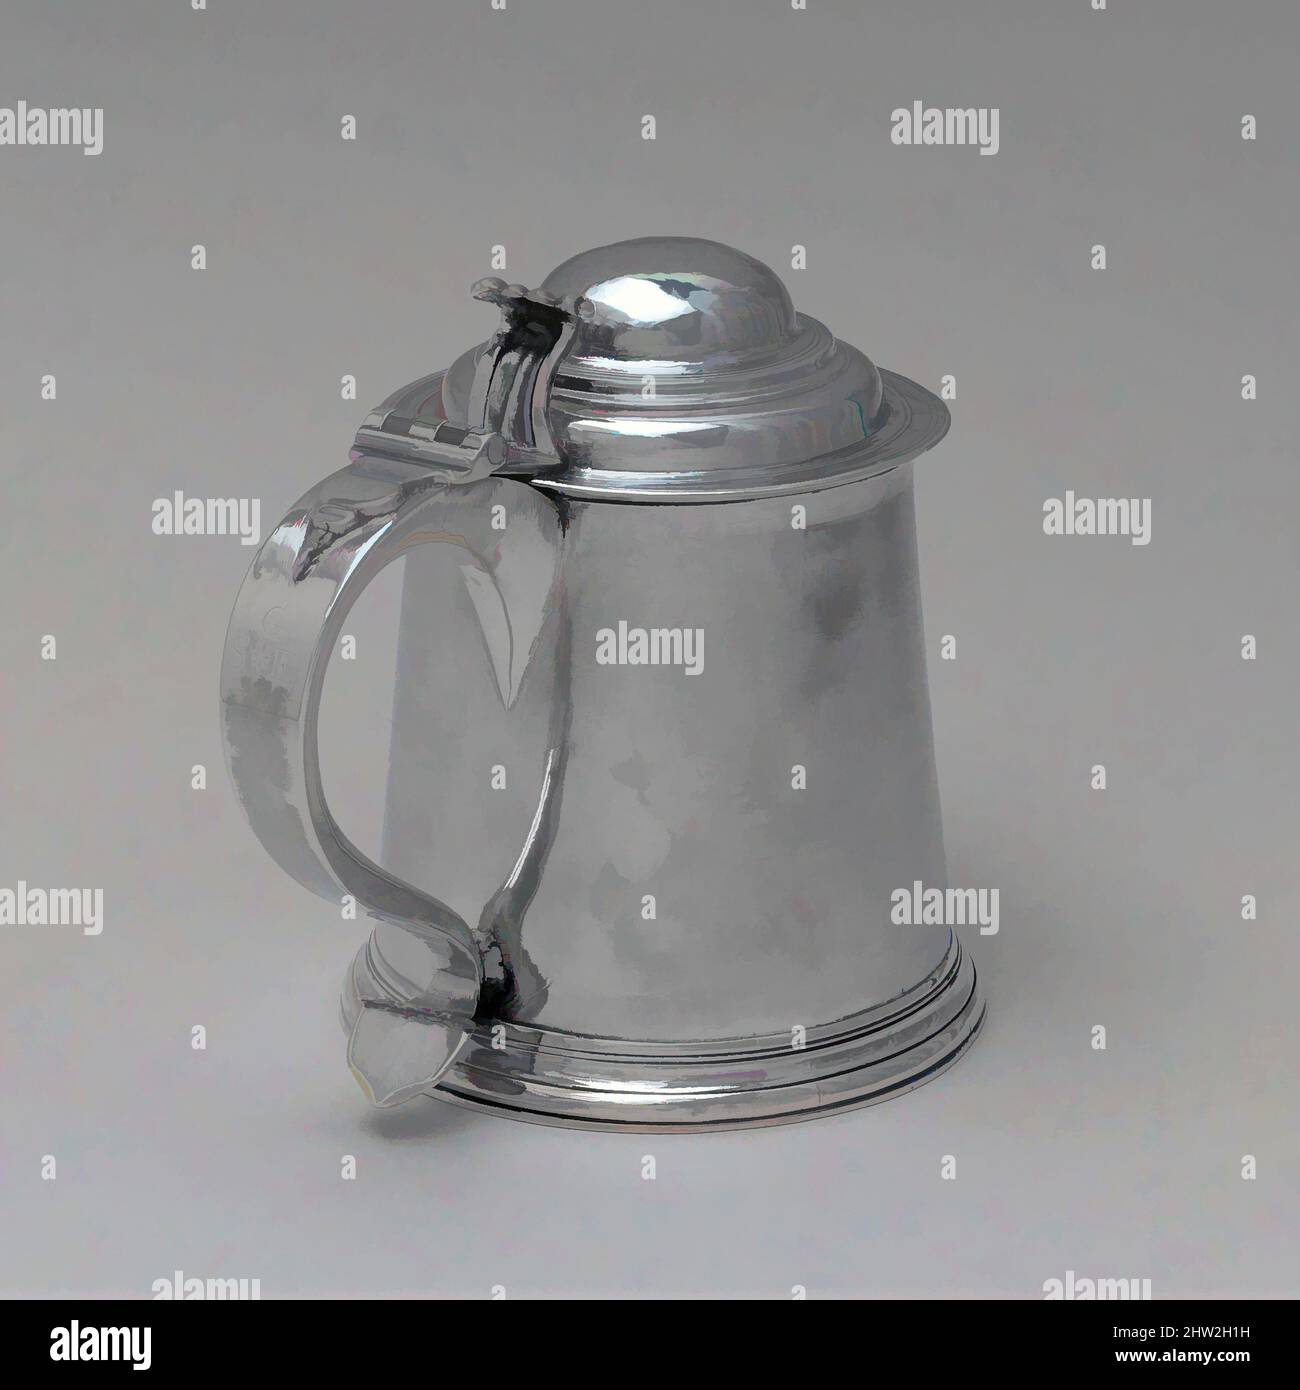 Art inspired by Tankard, 1730–50, Made in Philadelphia, Pennsylvania, United States, American, Silver, Overall: 7 1/16 x 8 1/8 in. (17.9 x 20.6 cm); 34 oz. 4 dwt. (1063.1 g), Silver, Philip Syng Jr. (1703–1789, Classic works modernized by Artotop with a splash of modernity. Shapes, color and value, eye-catching visual impact on art. Emotions through freedom of artworks in a contemporary way. A timeless message pursuing a wildly creative new direction. Artists turning to the digital medium and creating the Artotop NFT Stock Photo